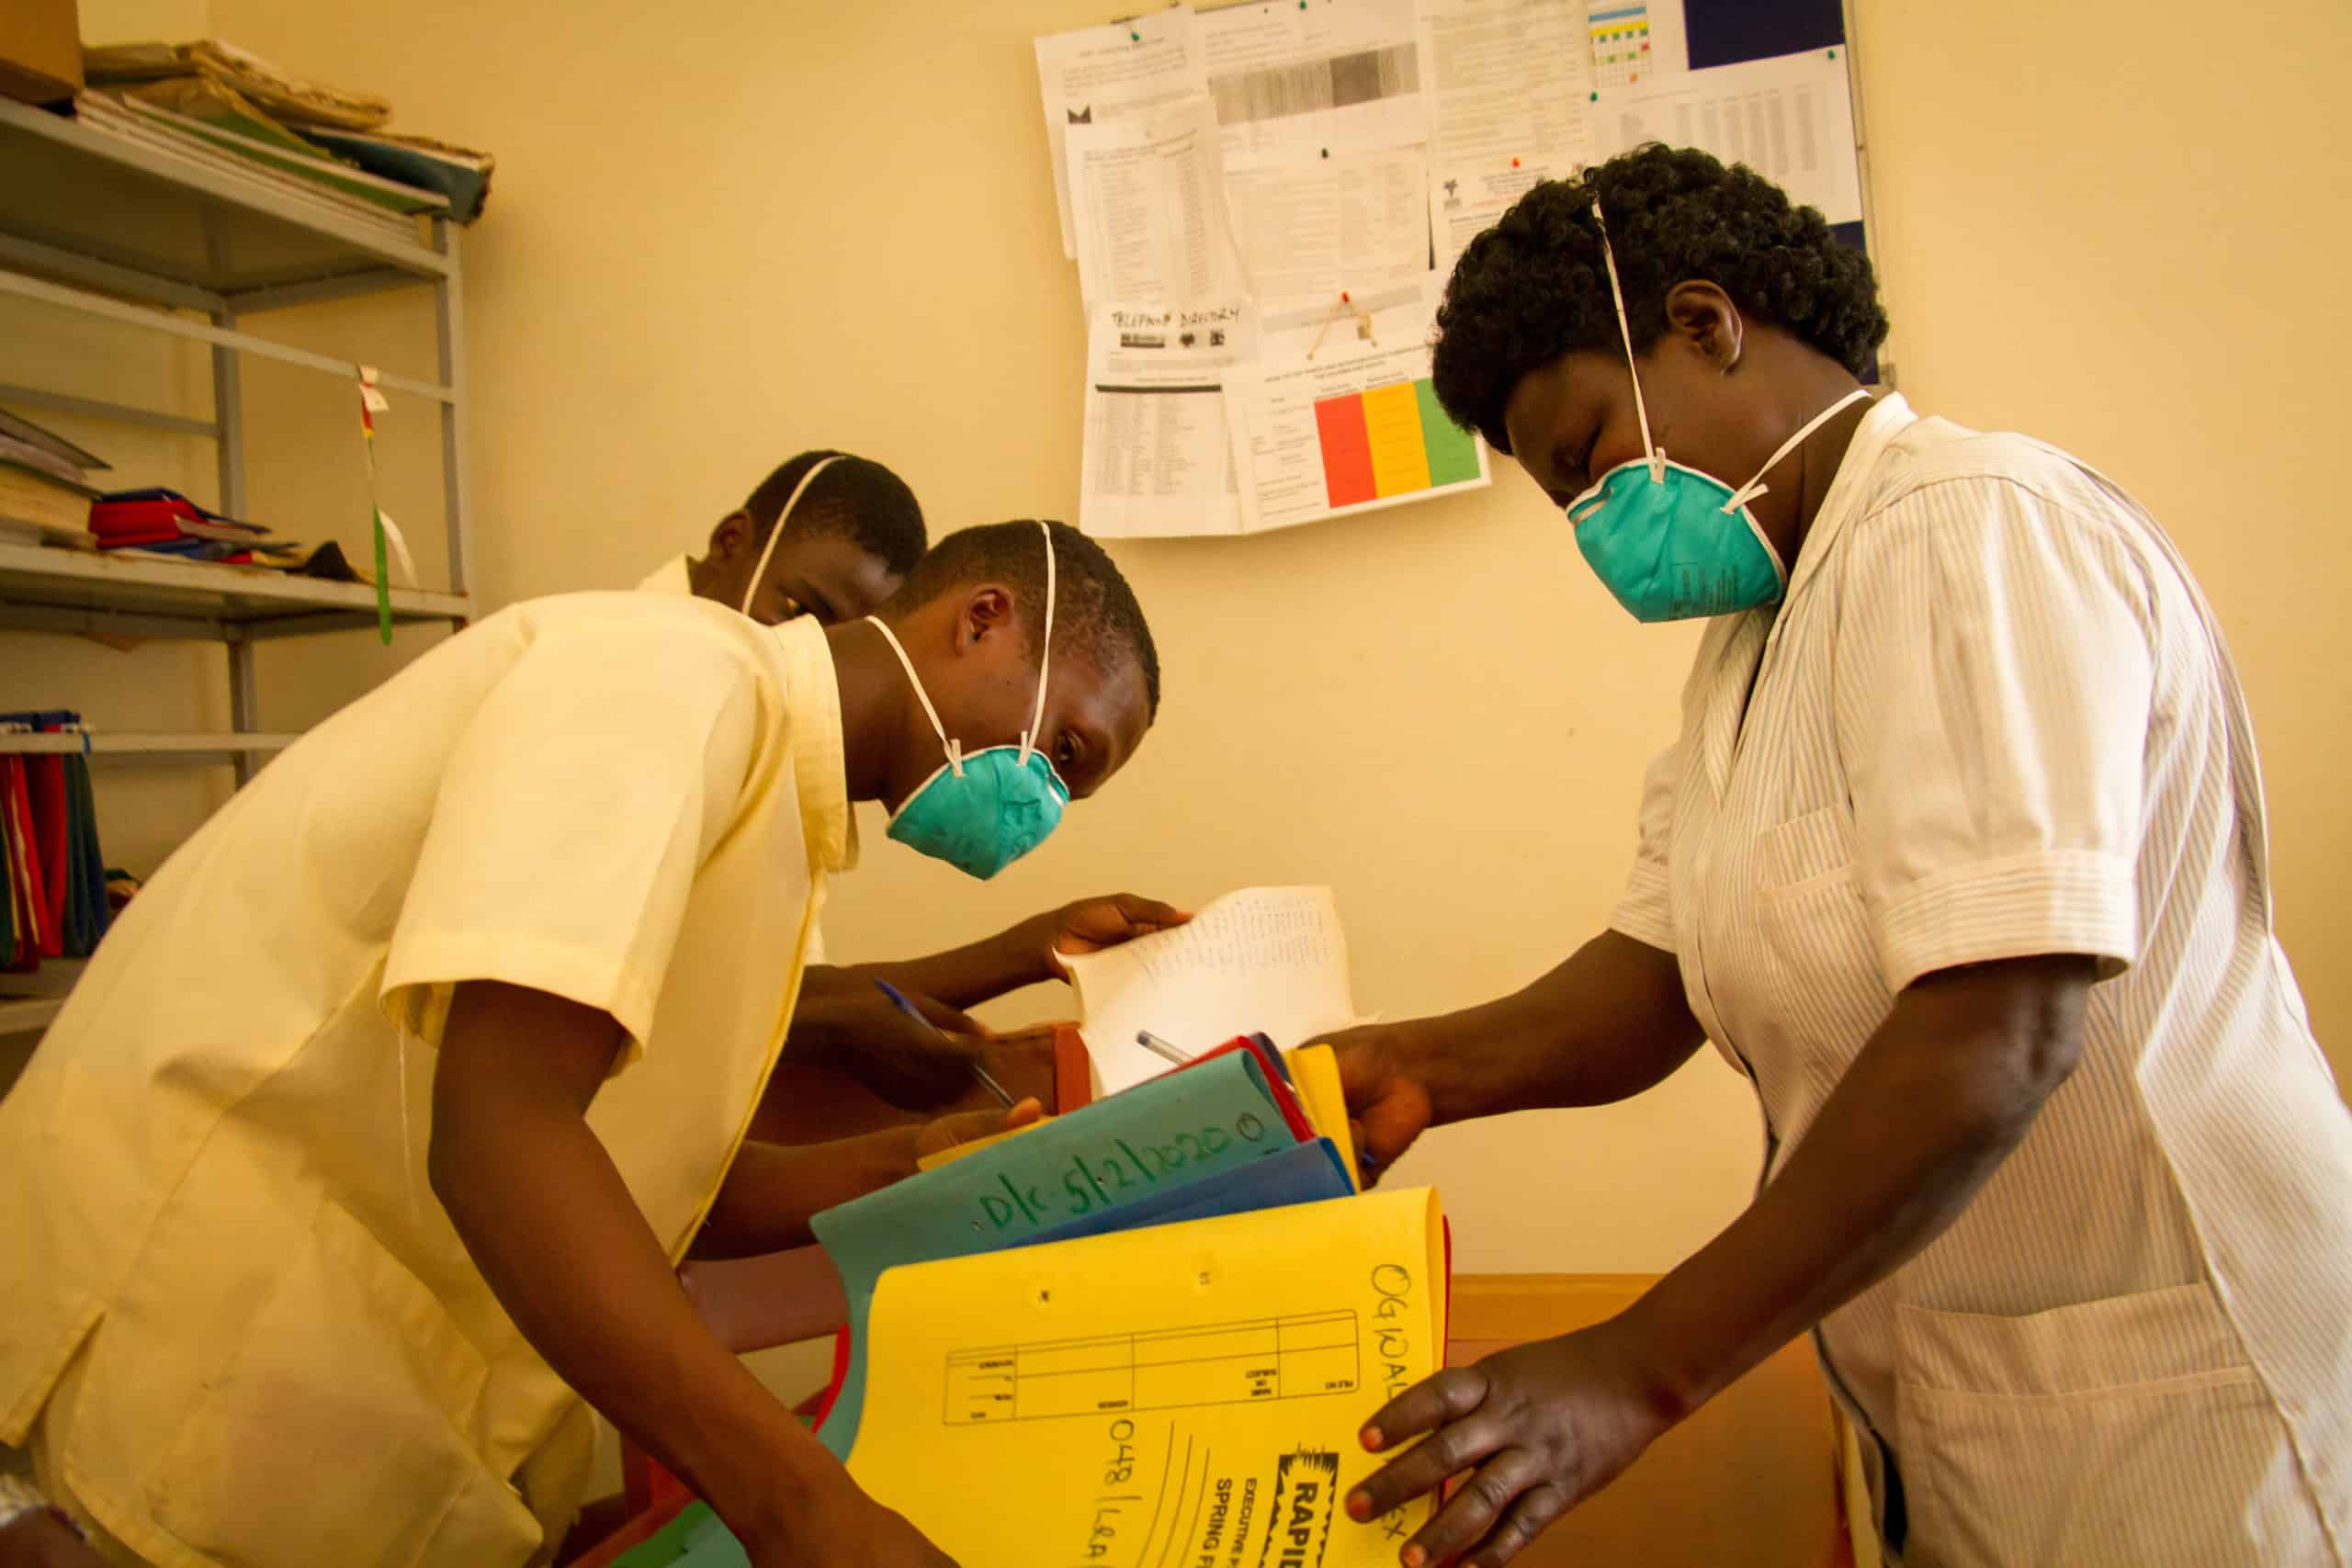 Four Key Prevention Strategies to End TB in our Generation